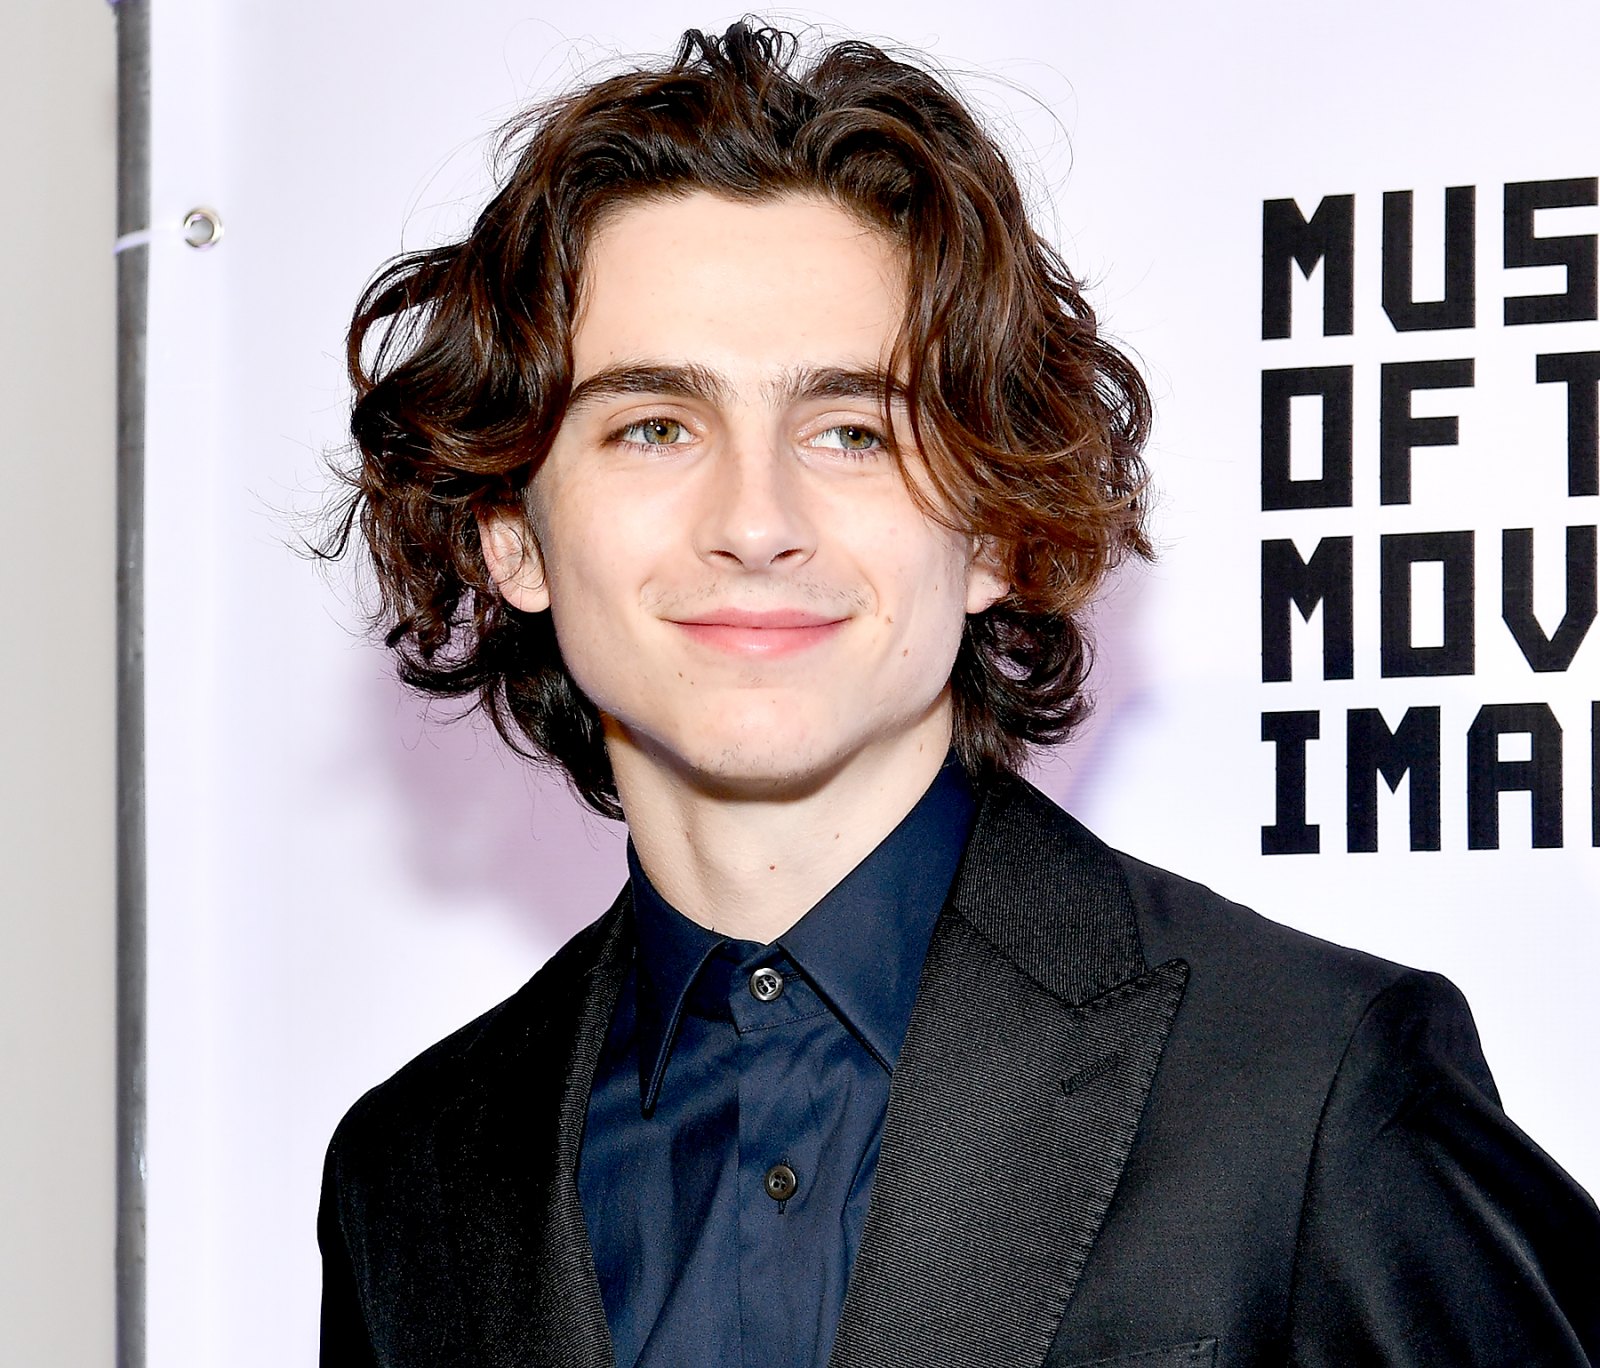 Who Is Timothee Chalamet? 5 Things to Know About the Actor